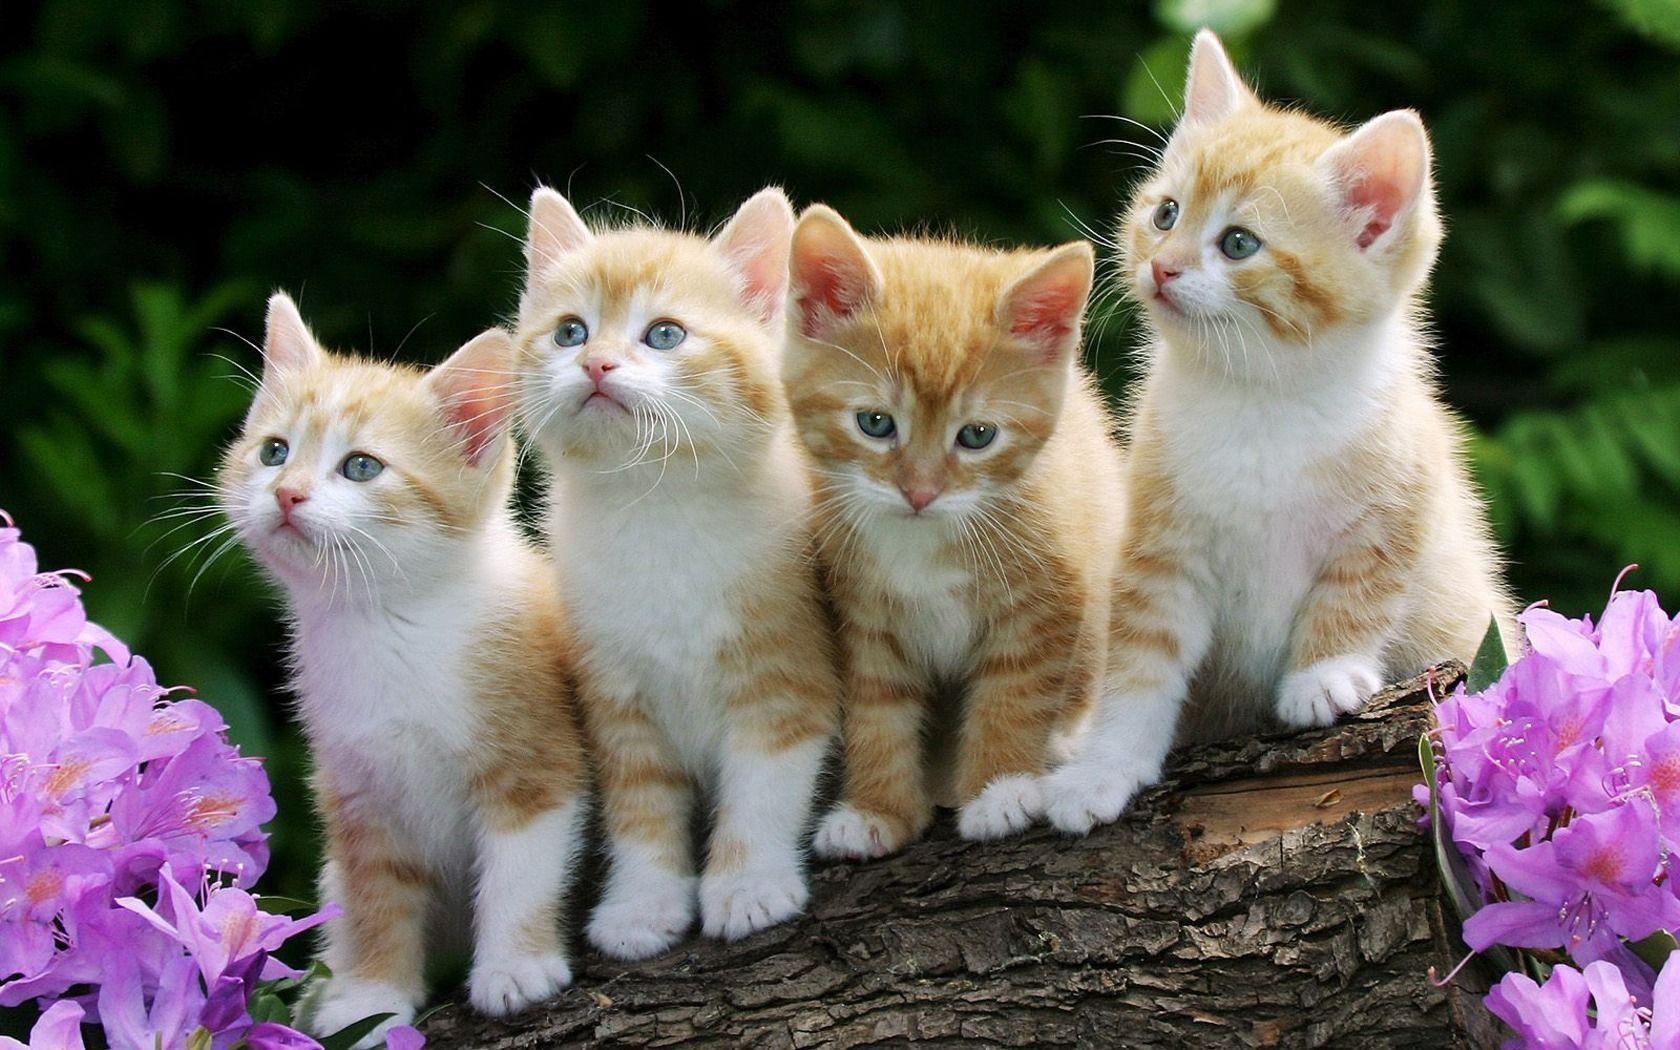 Wallpapers For > Wallpapers Of Kittens And Puppies